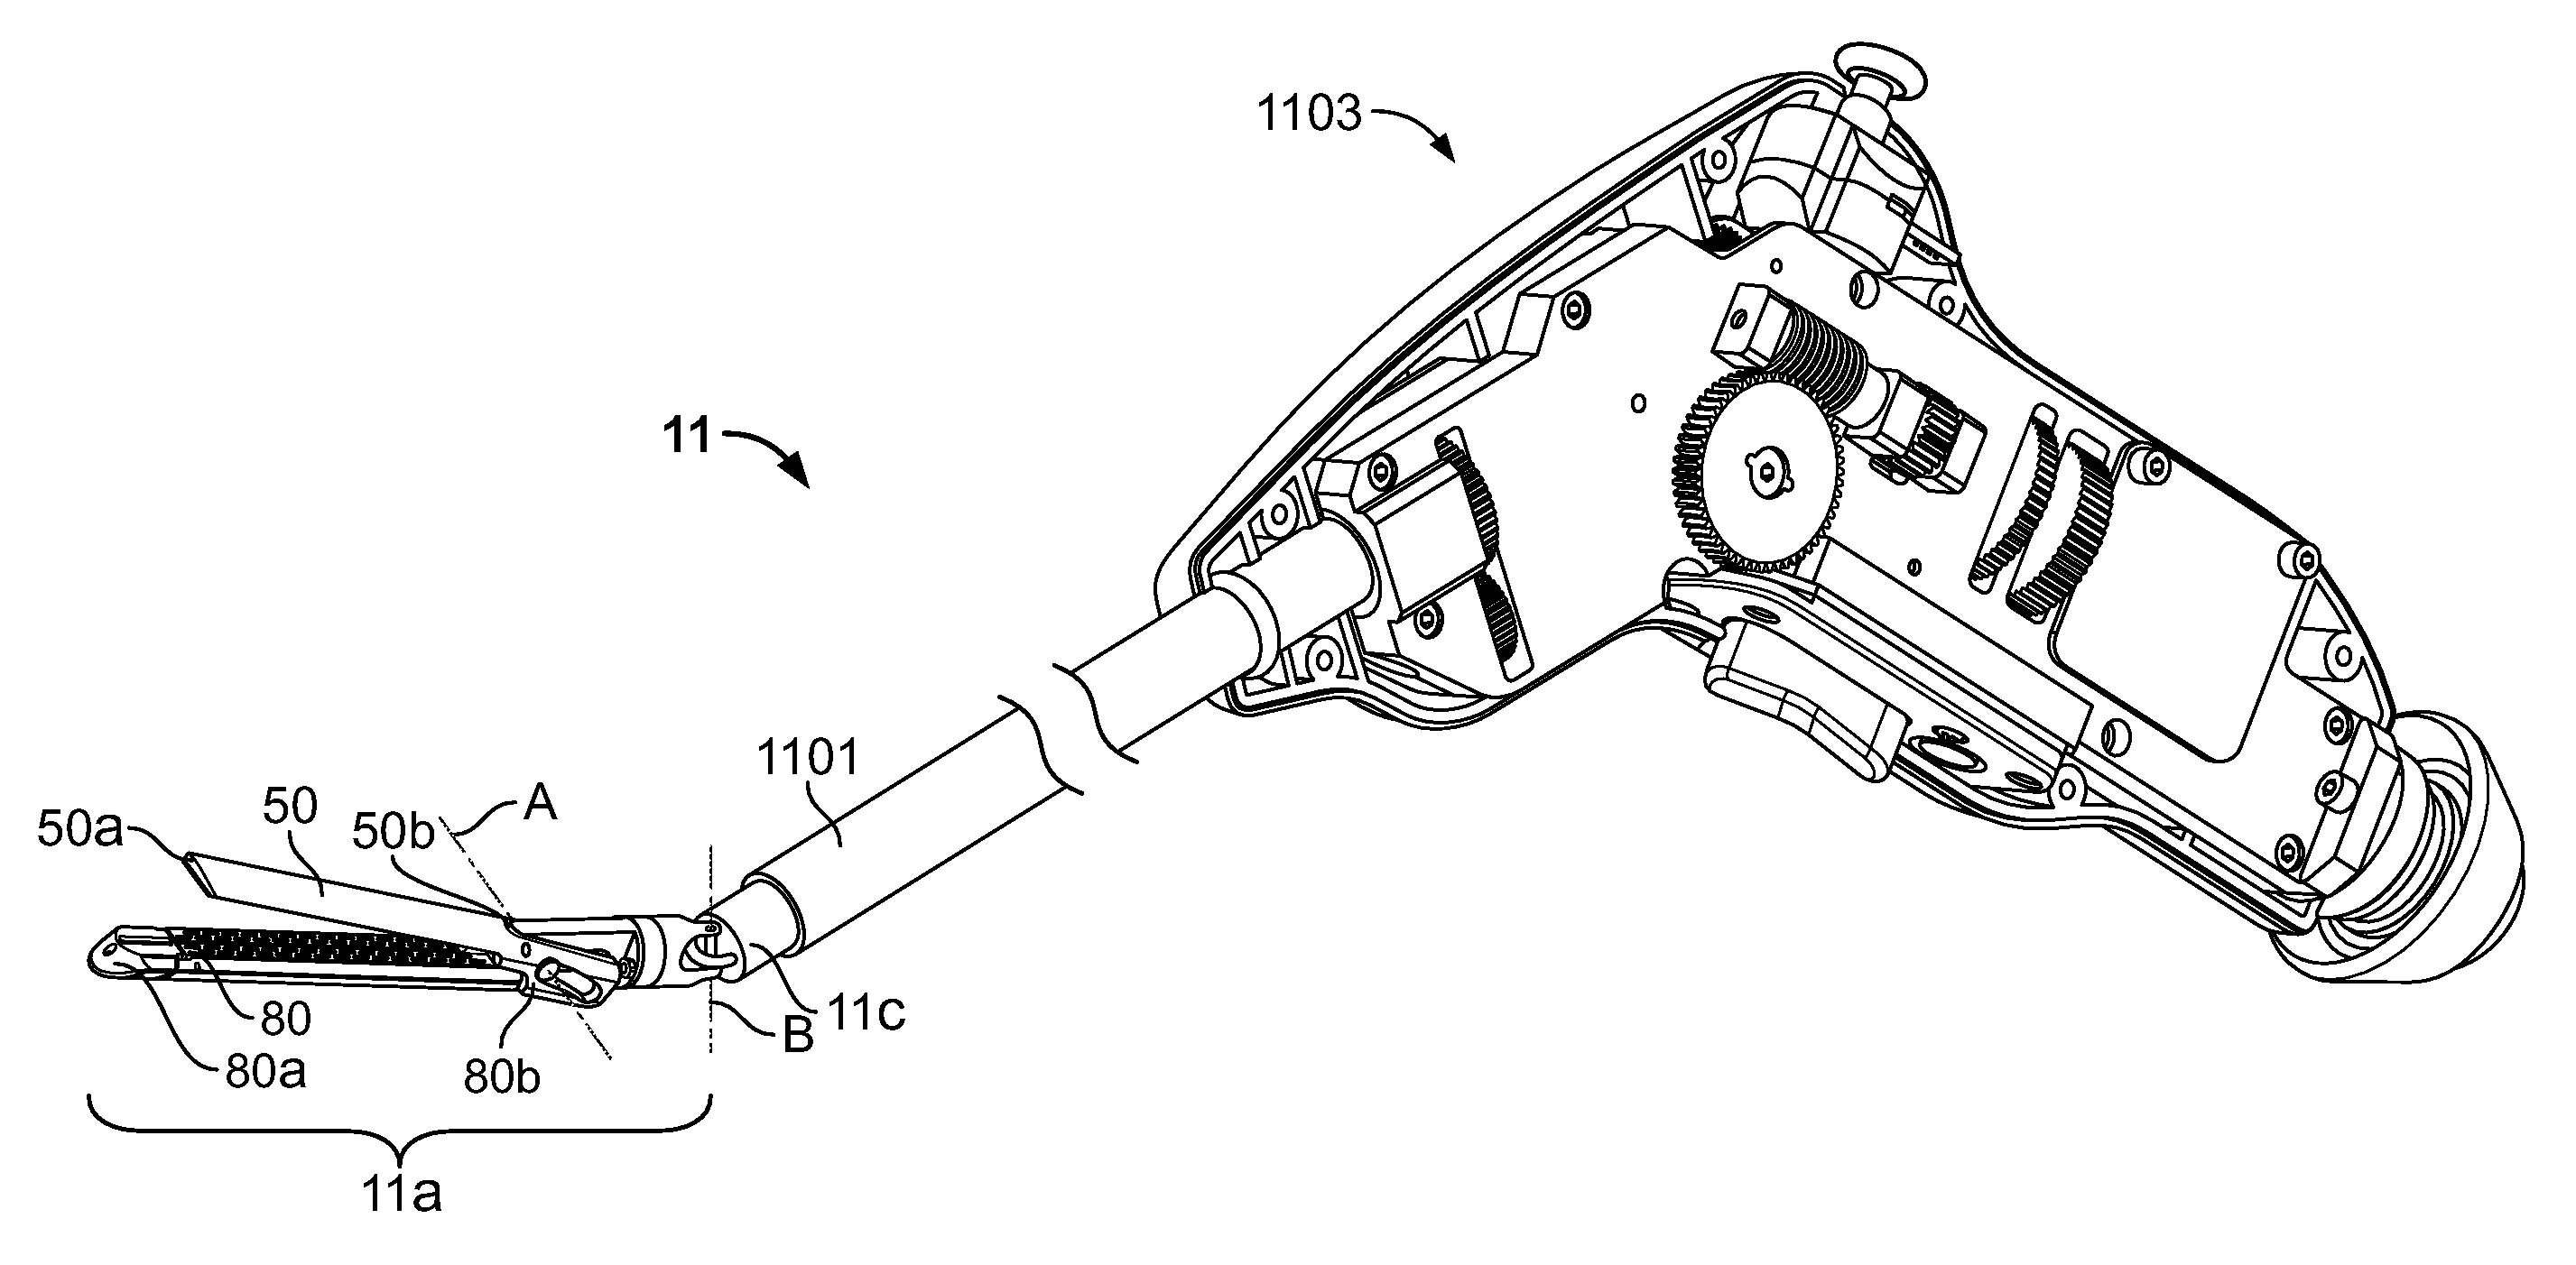 Surgical device having multiple drivers